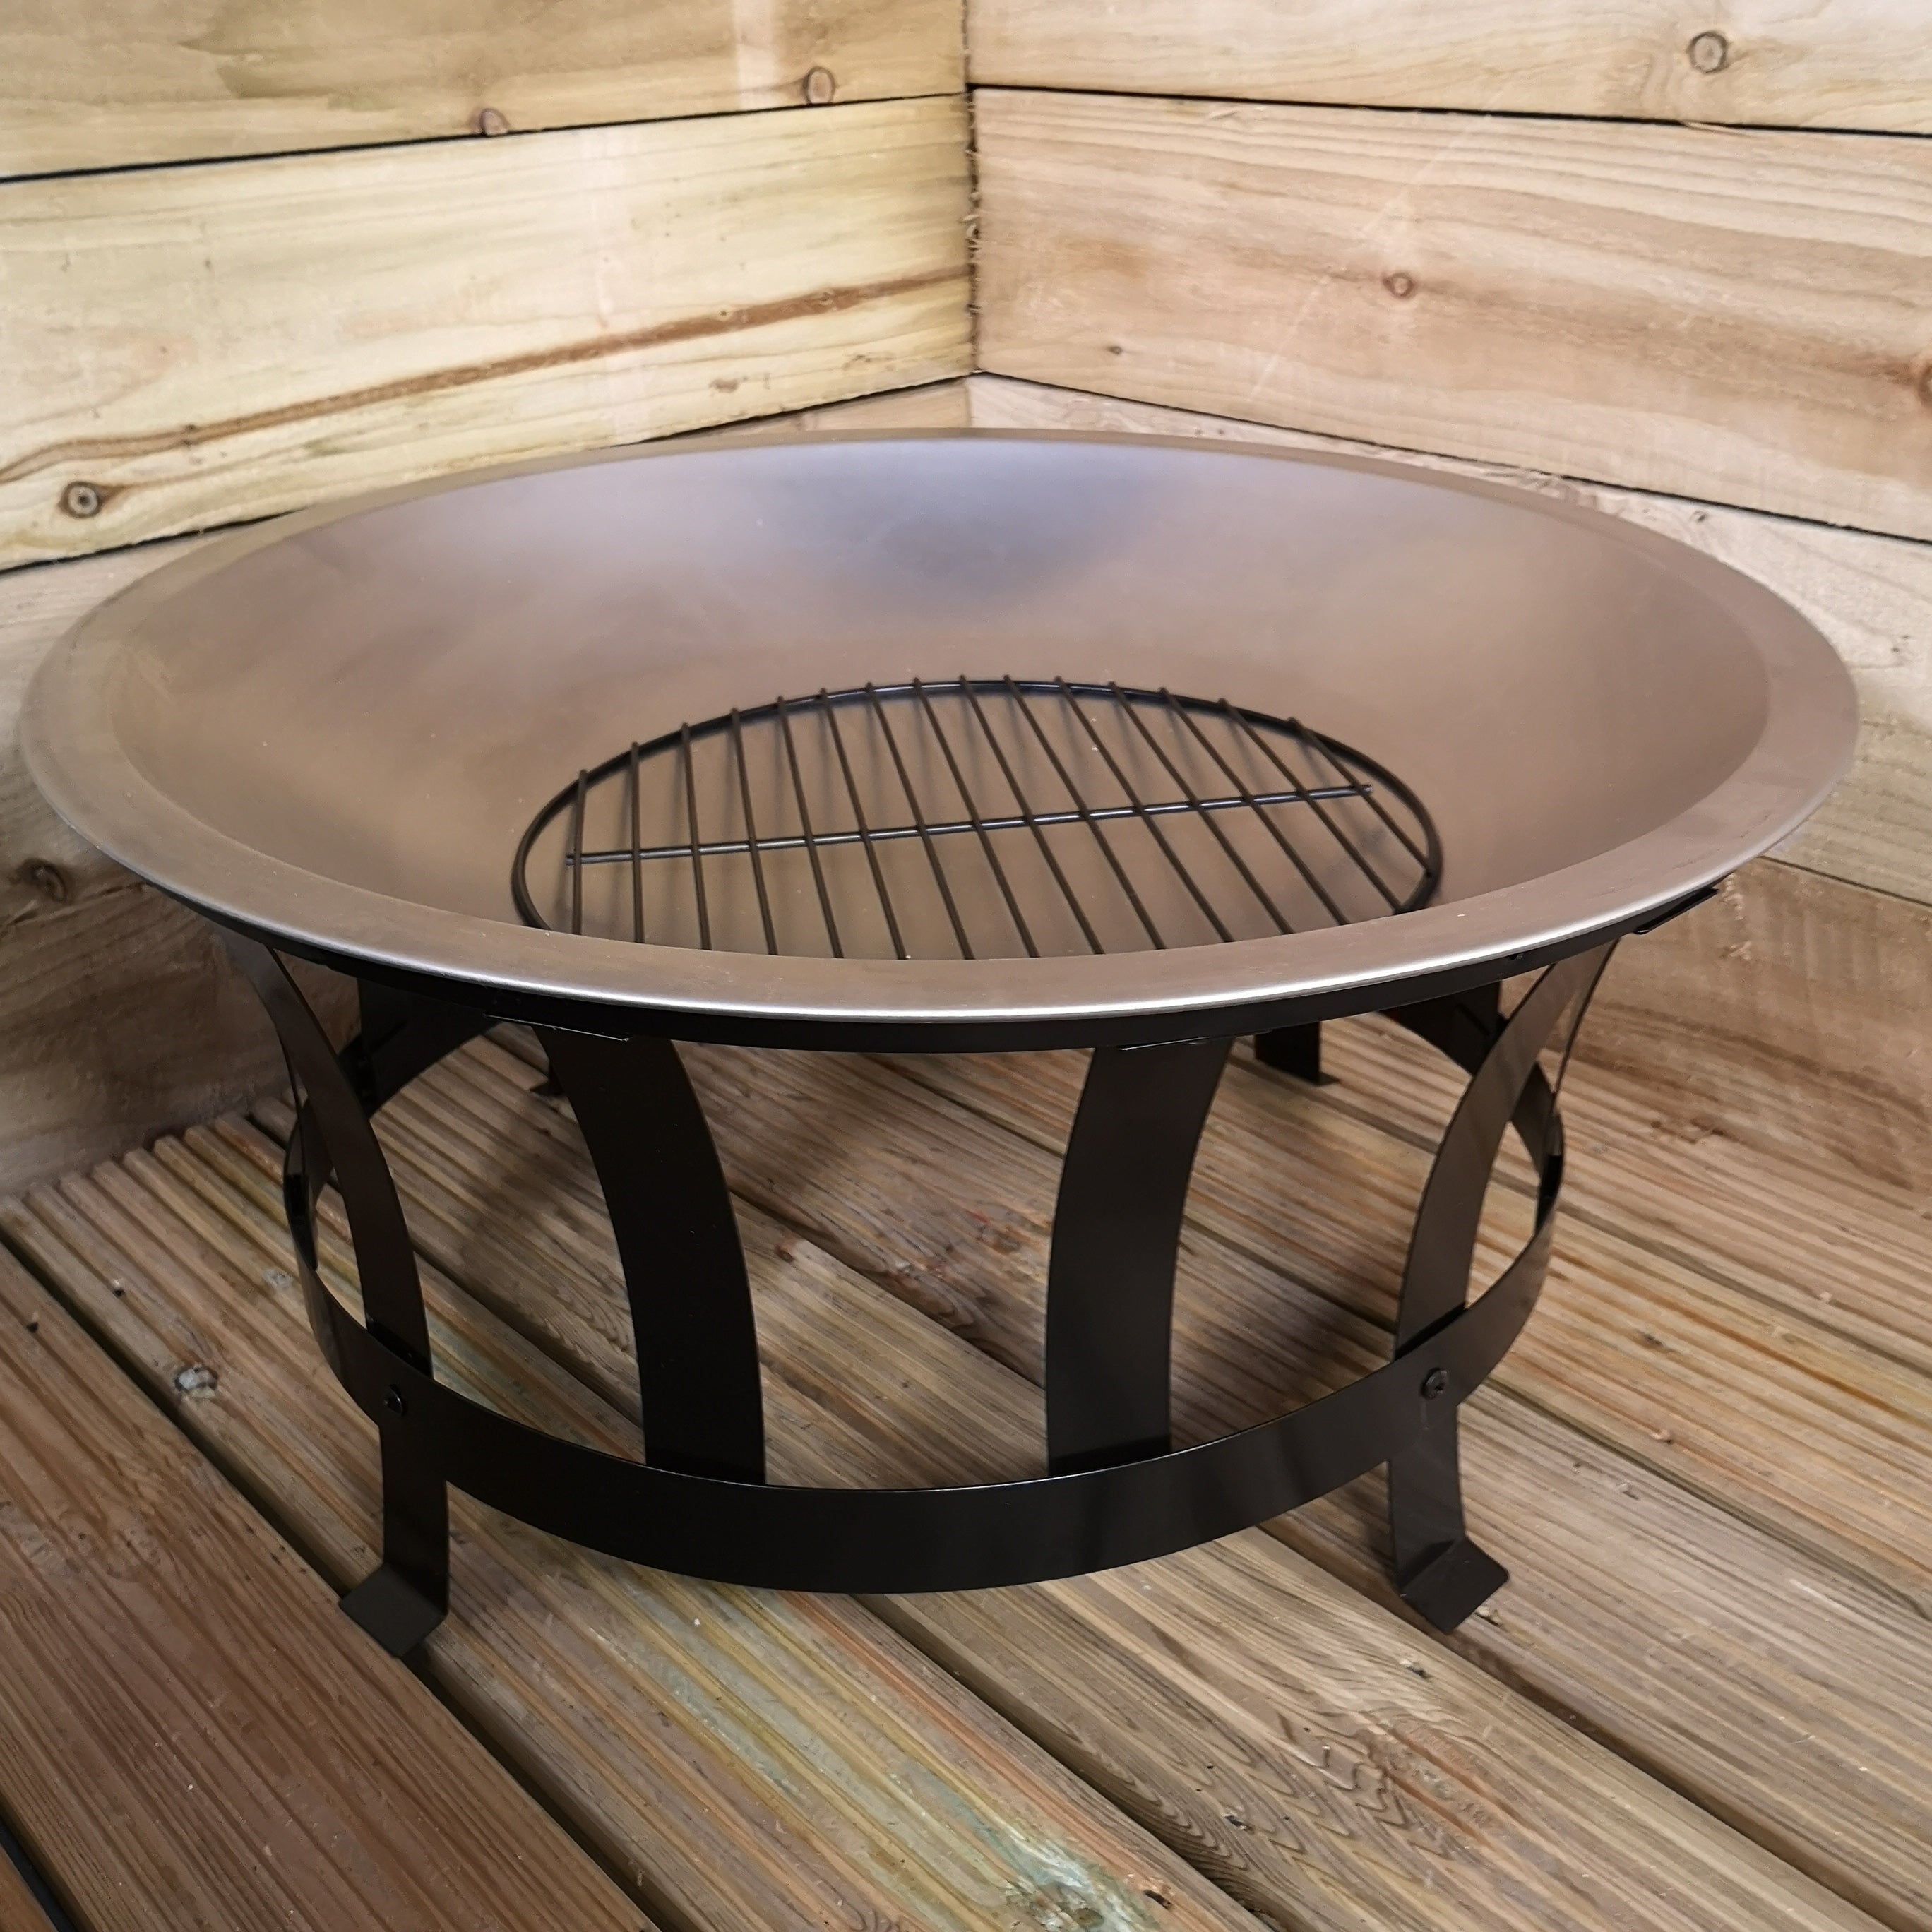 60cm Garden Fire Pit Bowl with Barbecue / BBQ Grill and Mesh Lid